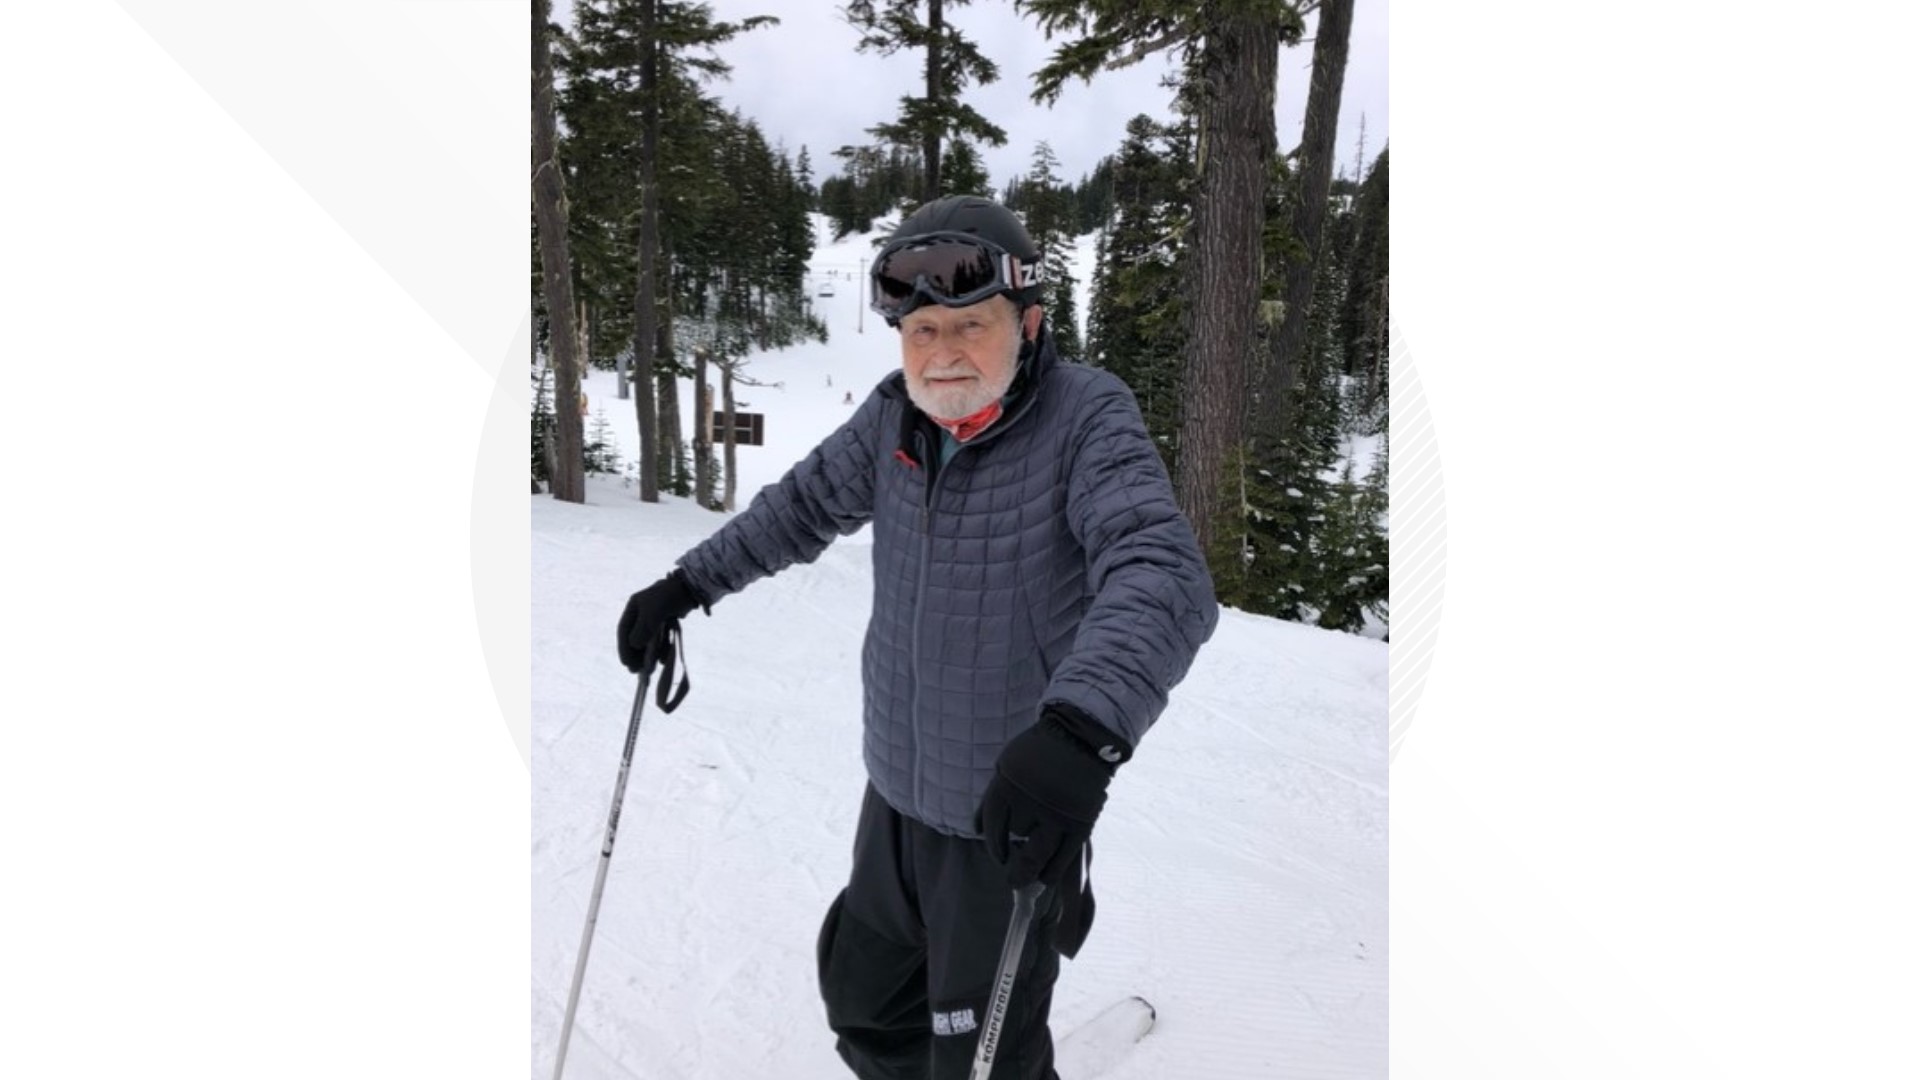 John Samuelson has been sharing the joy of Mt. Hood with others for decades. He started skiing at age 40, instructing at 60, and is still carving turns at 96.